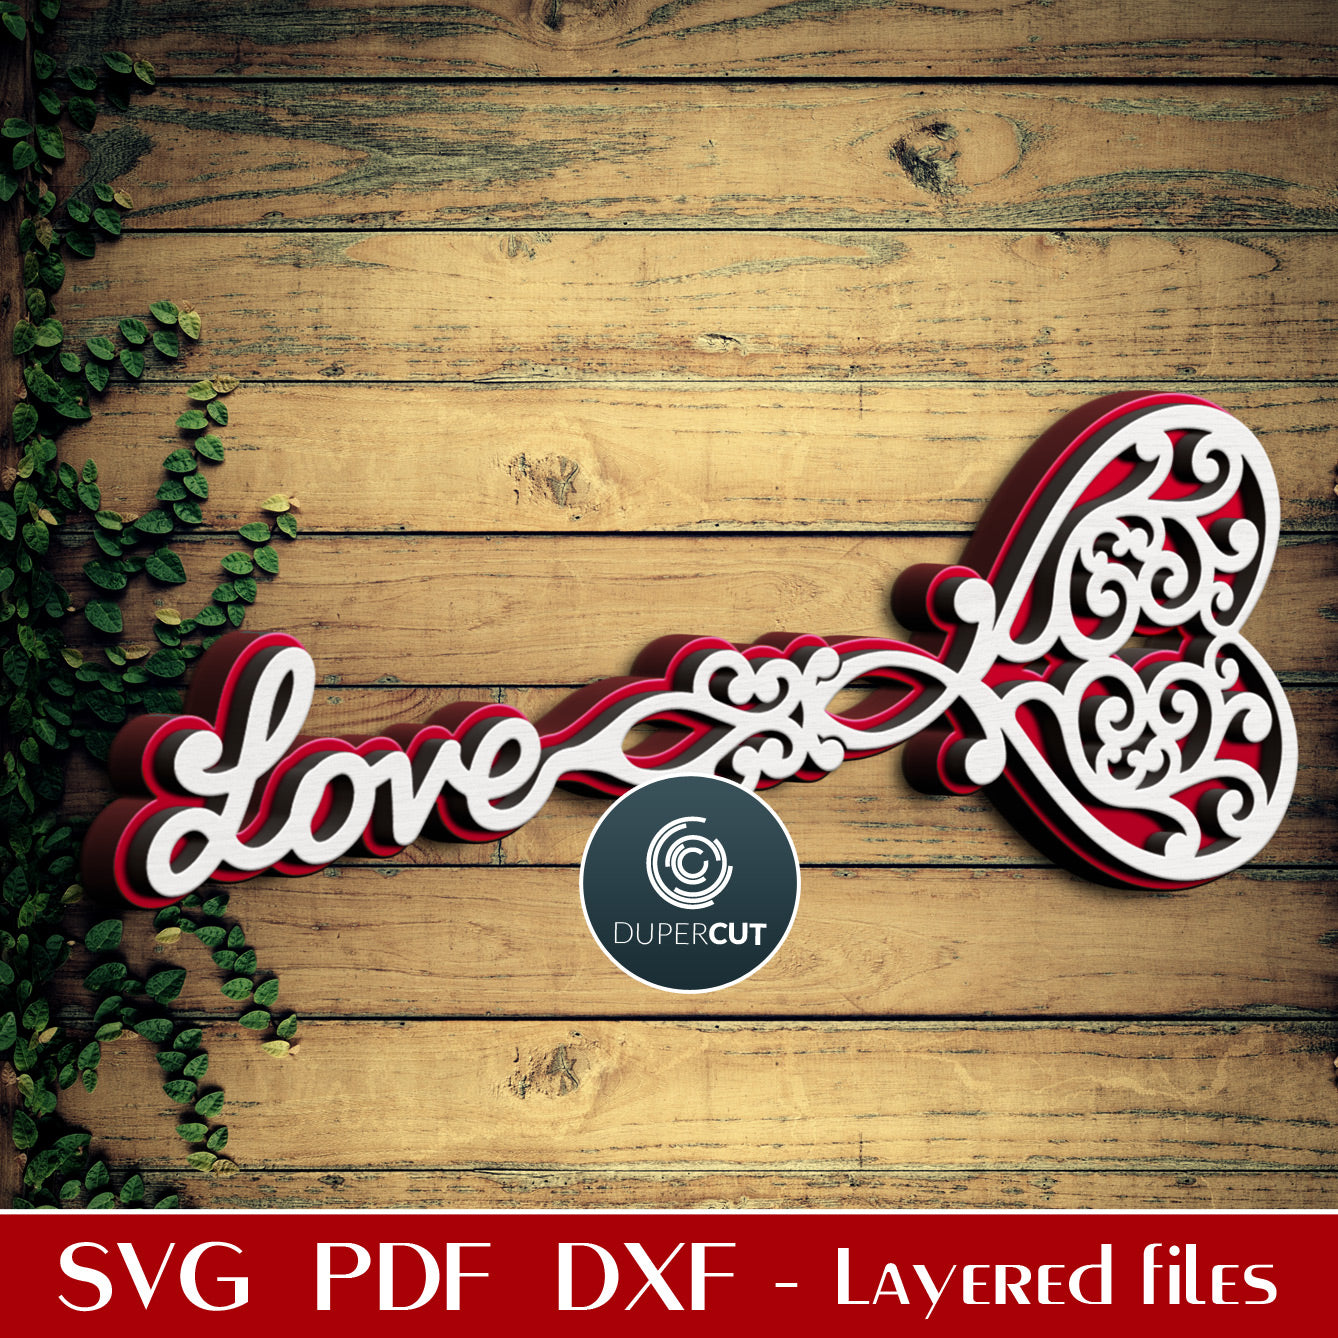 Love Key to my heart - Valentine's day key layered decoration SVG DXF vector pattern for Glowforge, Cricut, Silhouette, CNC plasma, scroll saw by DuperCut.com